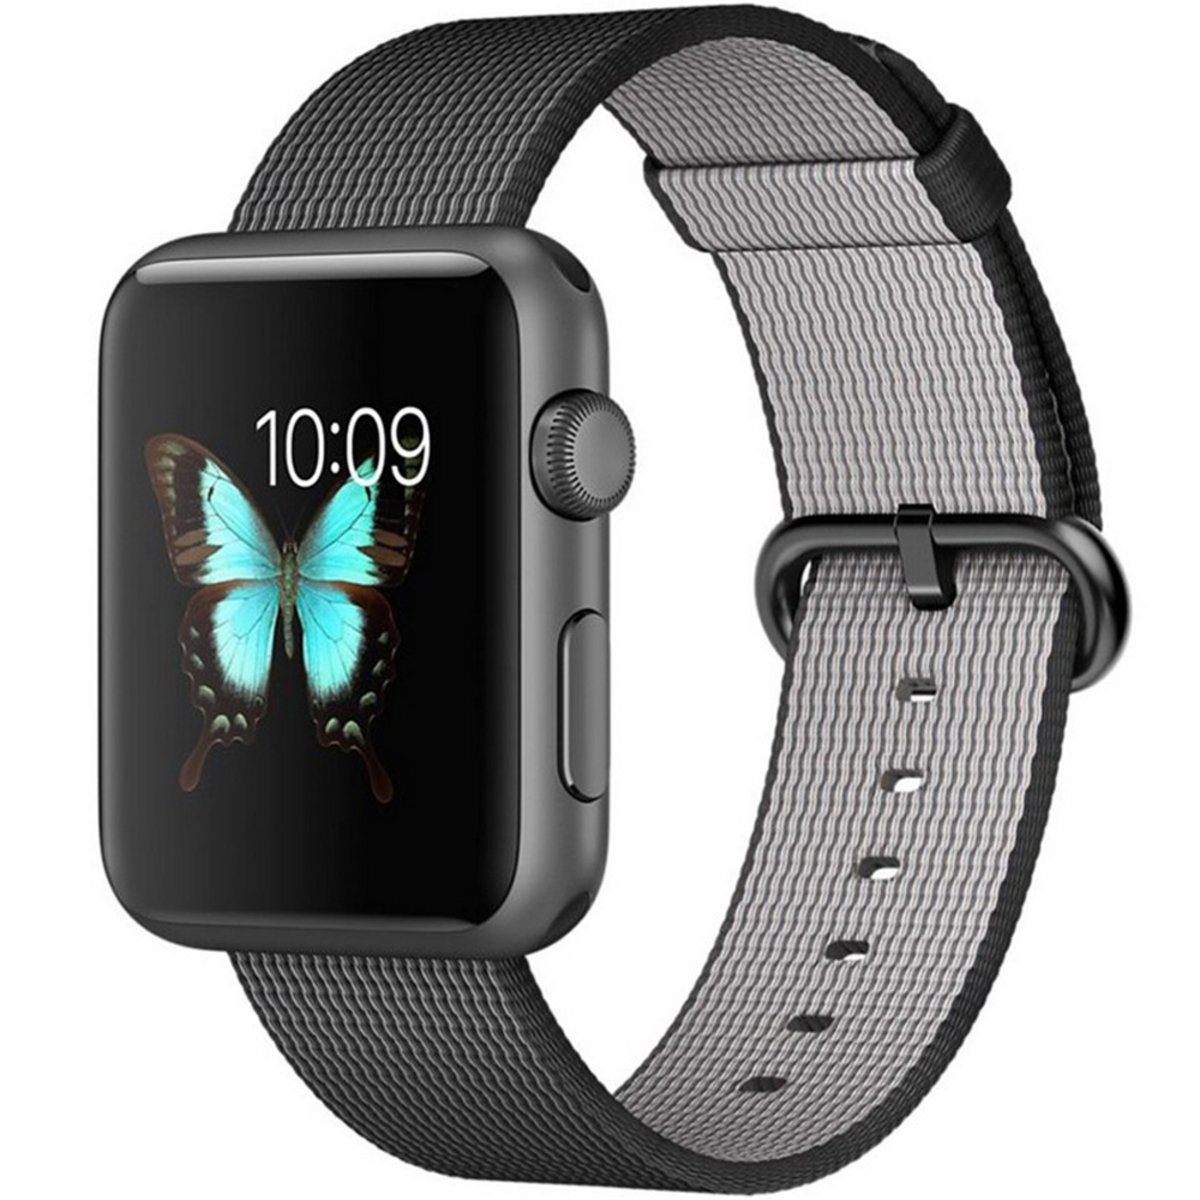 Apple Watch Sport MMFR2 42mm Space Grey Aluminum Case With Black Woven Nylon Band